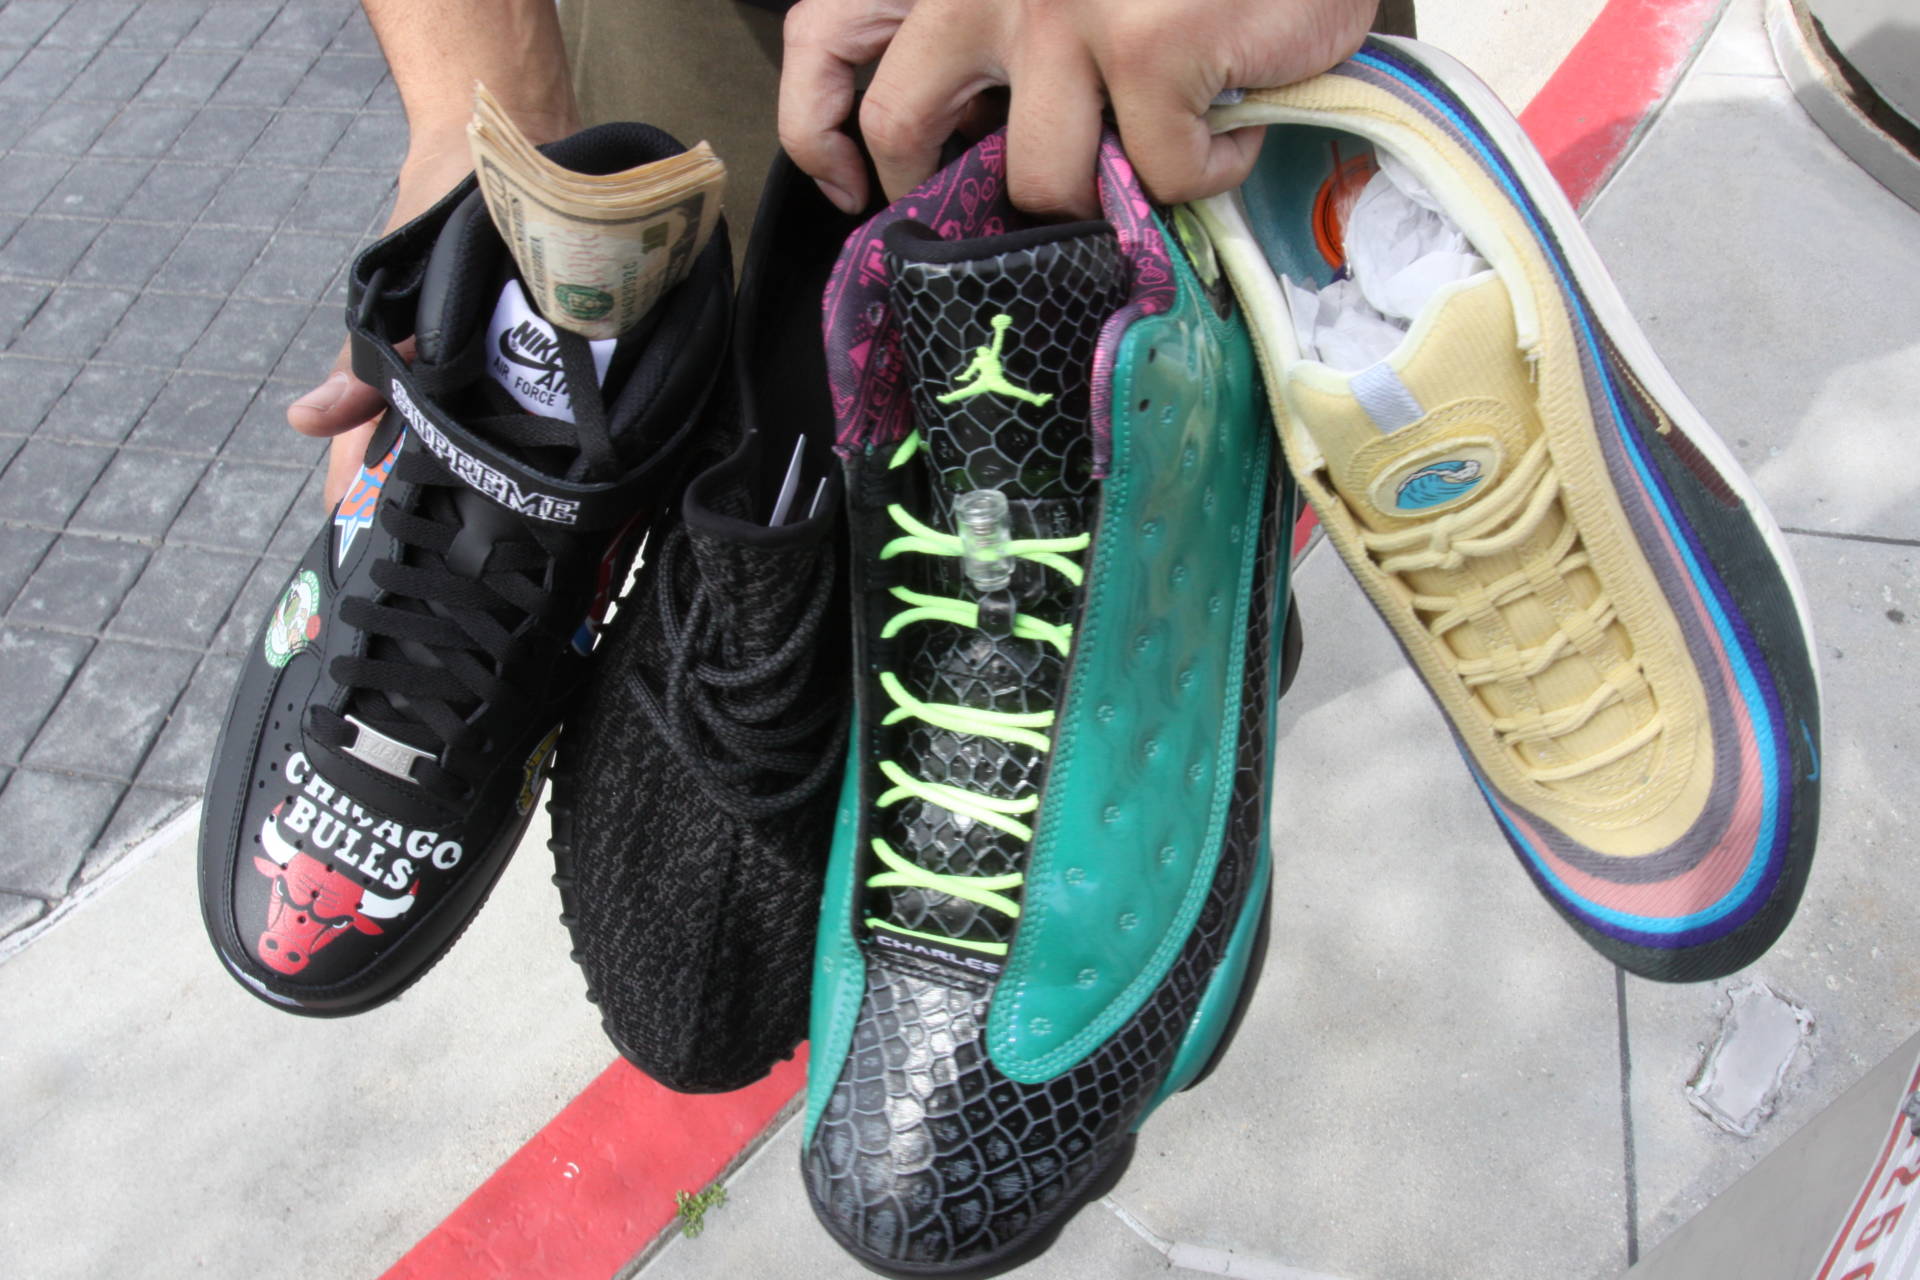 Attendees began to hawk shoes like these four sneakers while they were waiting in line for the doors to open at Sneaker Con on Saturday, March 31, 2018.